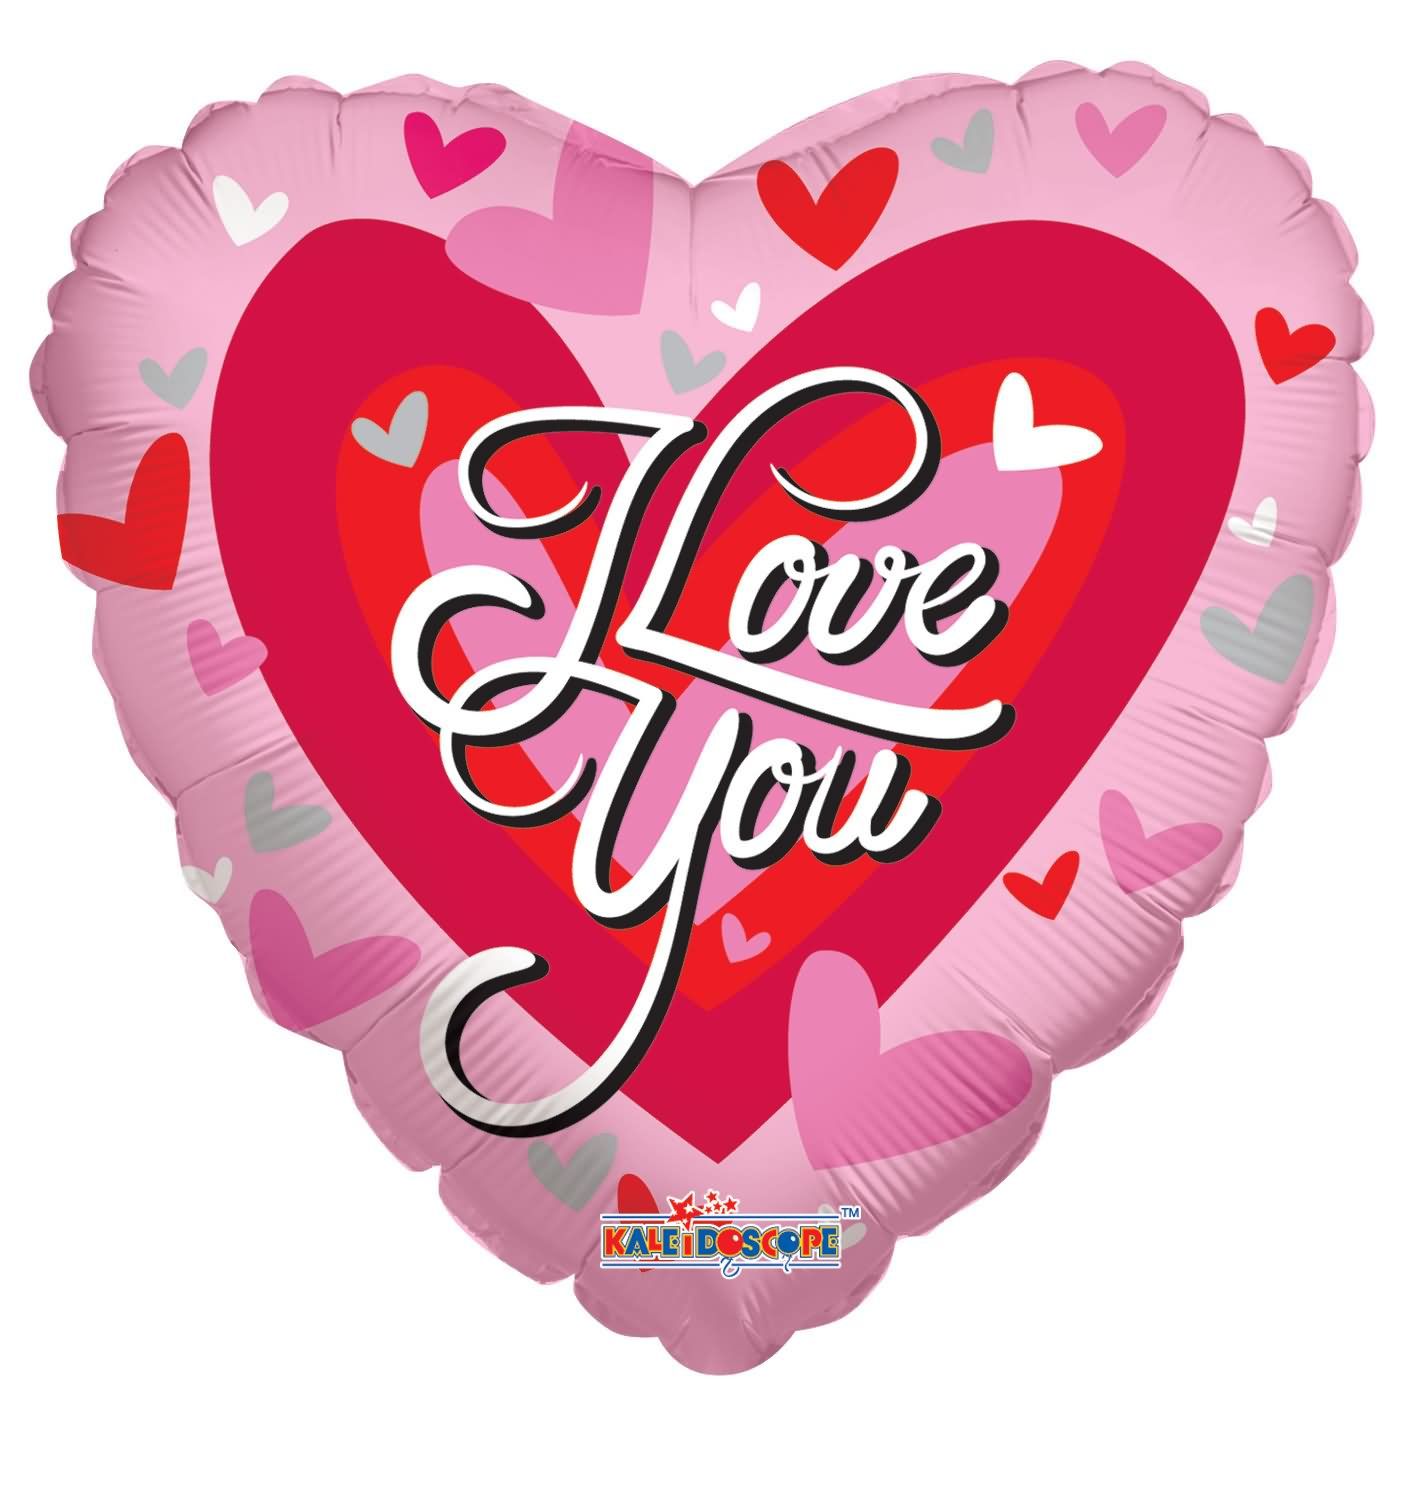 I Love You Baby Wallpapers Wallpaper Cave